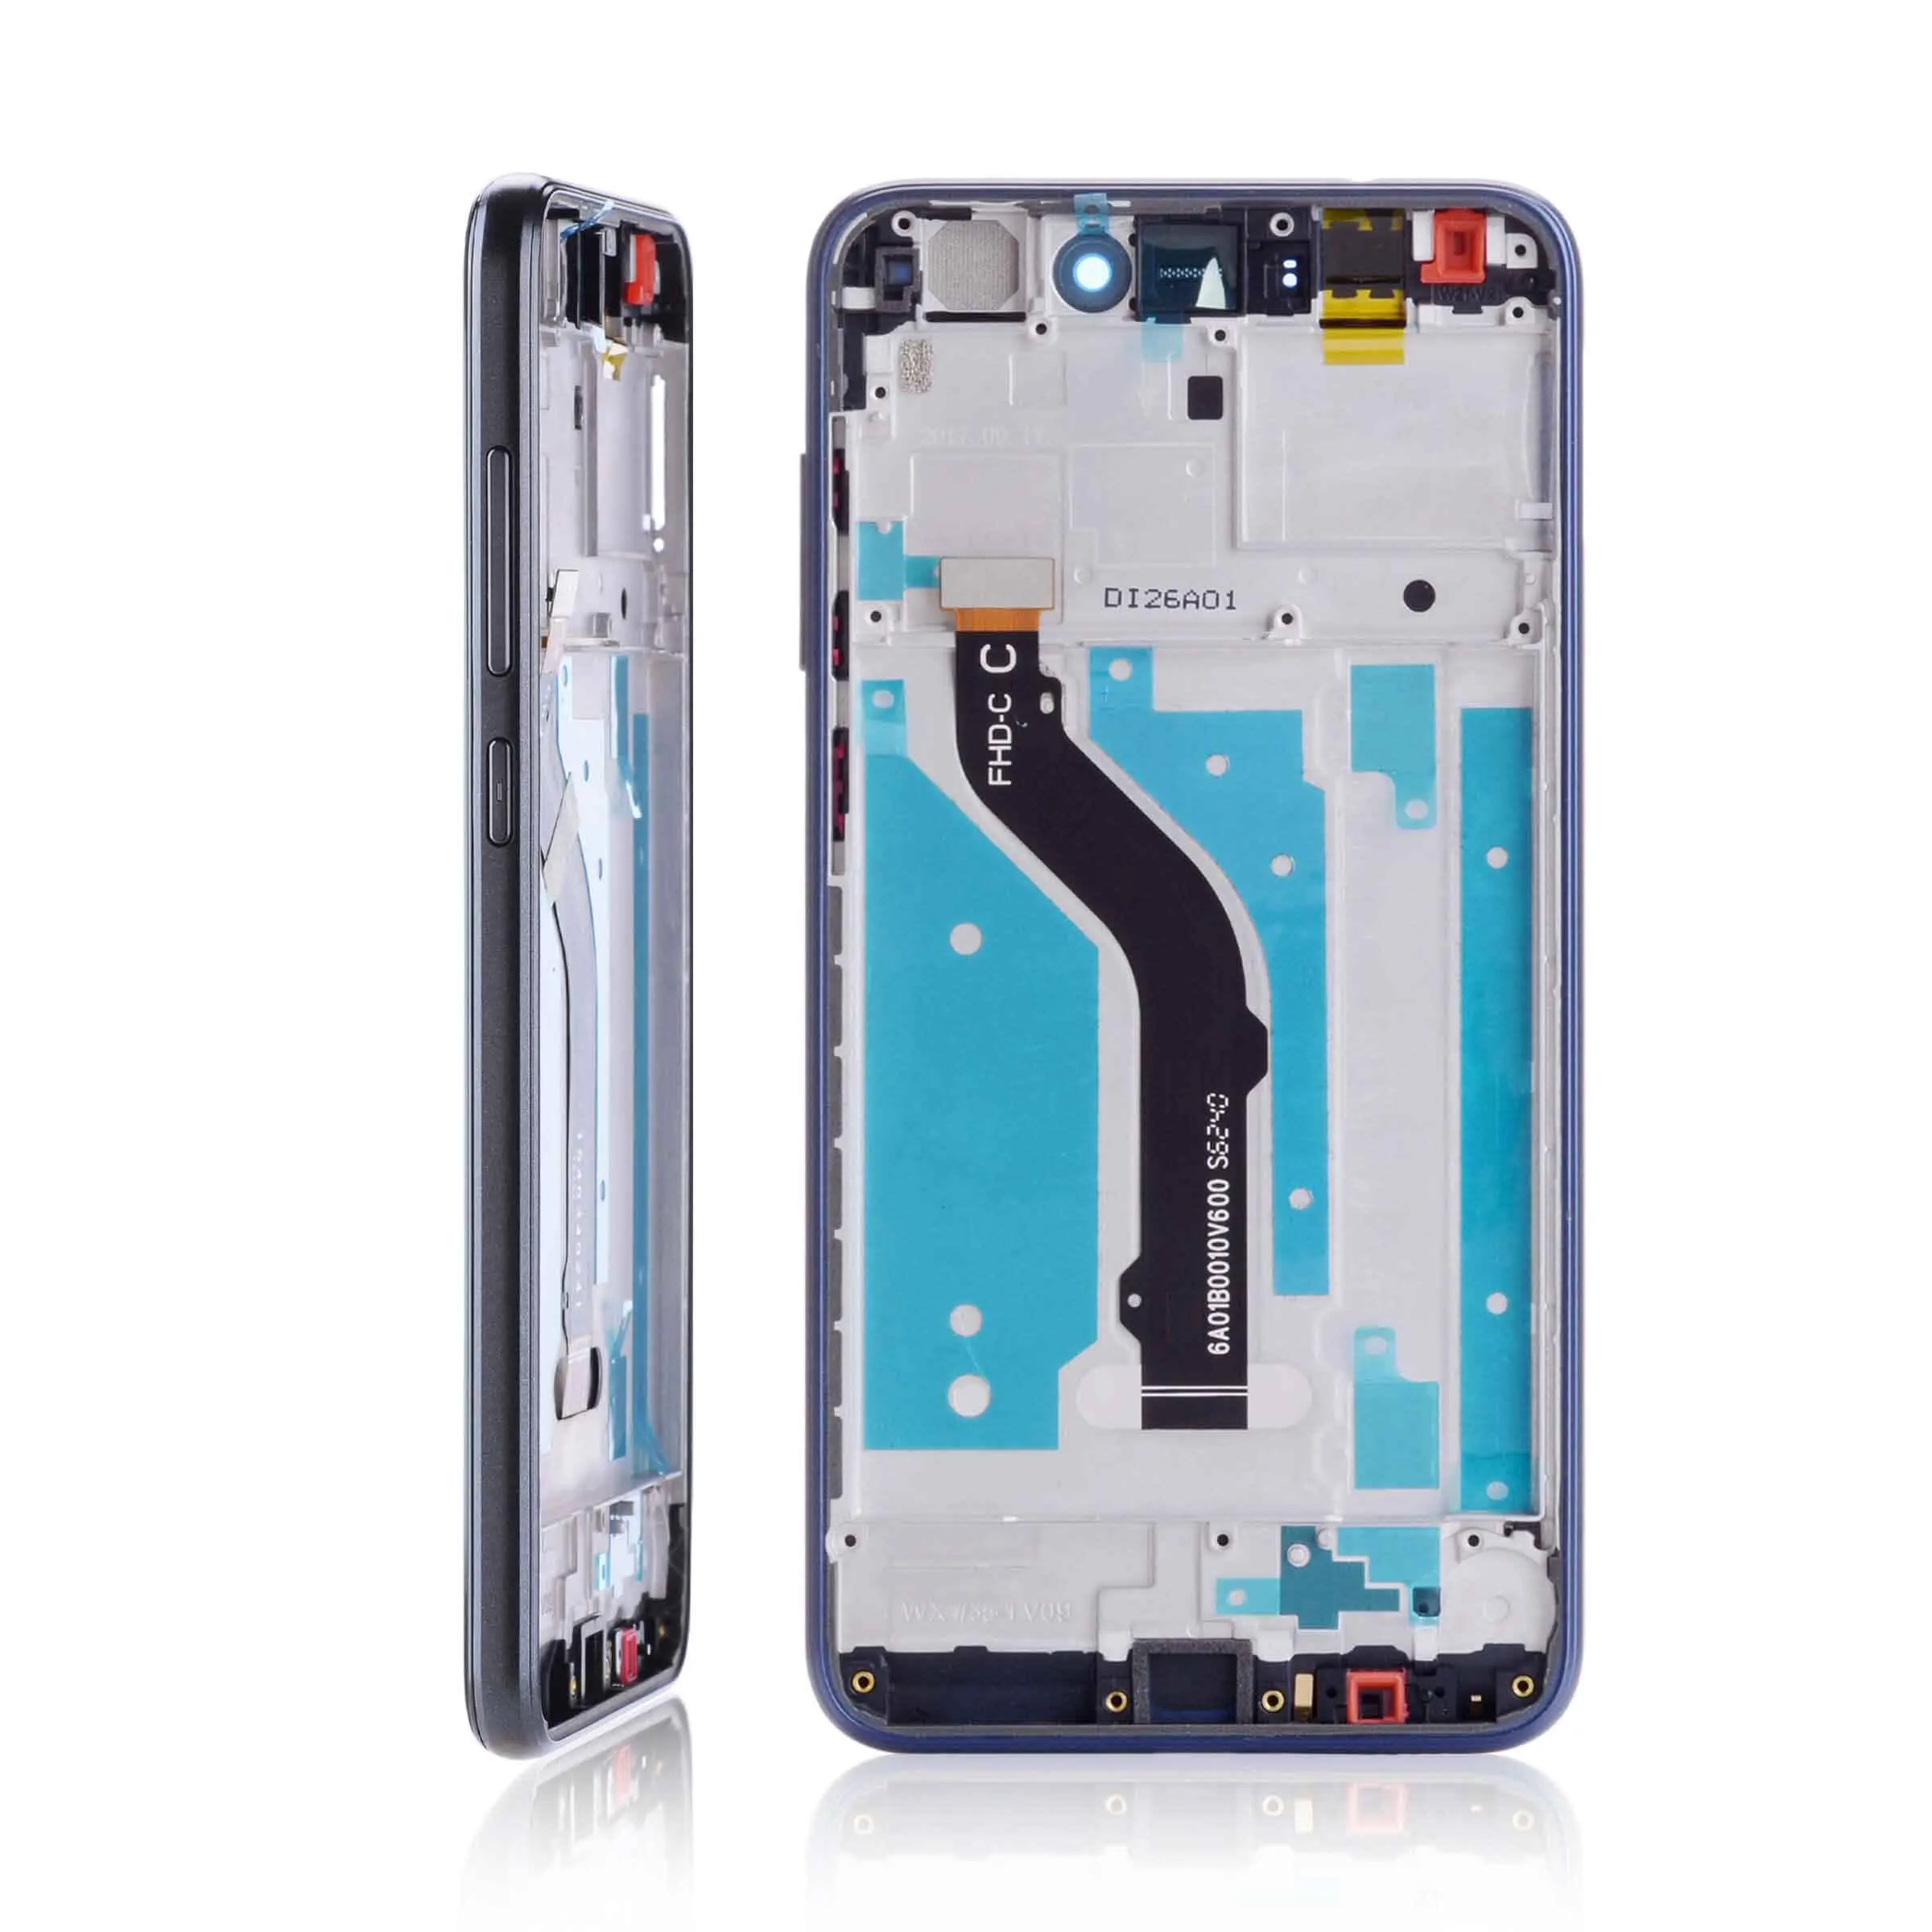 5.2 Original LCD For Huawei P9 Lite 2017 Display Touch Screen Frame Replace For Huawei P9 Lite 2017 LCD Display Assembly Pra lx1